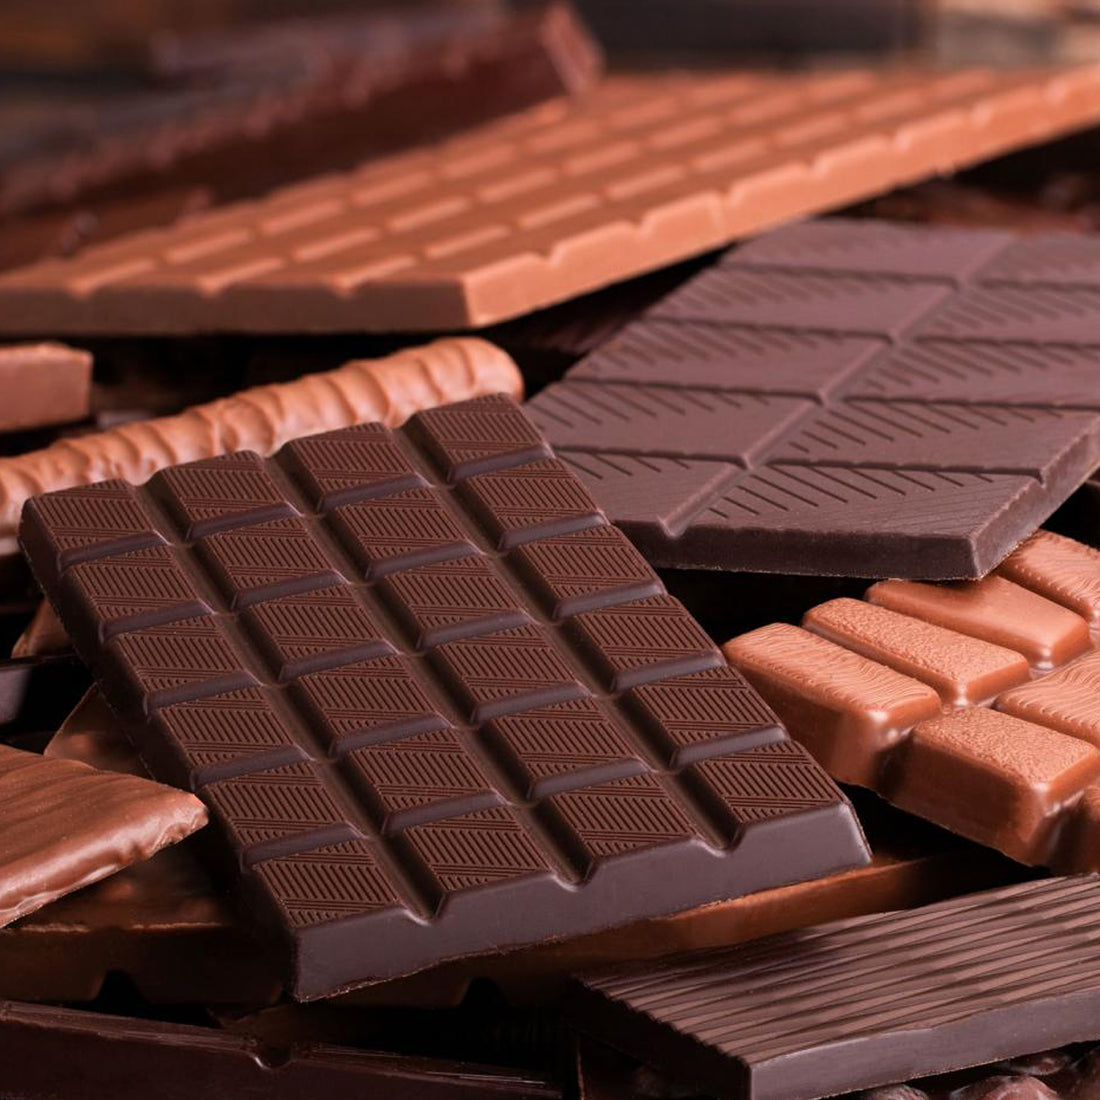 Chocolate is dying. Long live chocolate